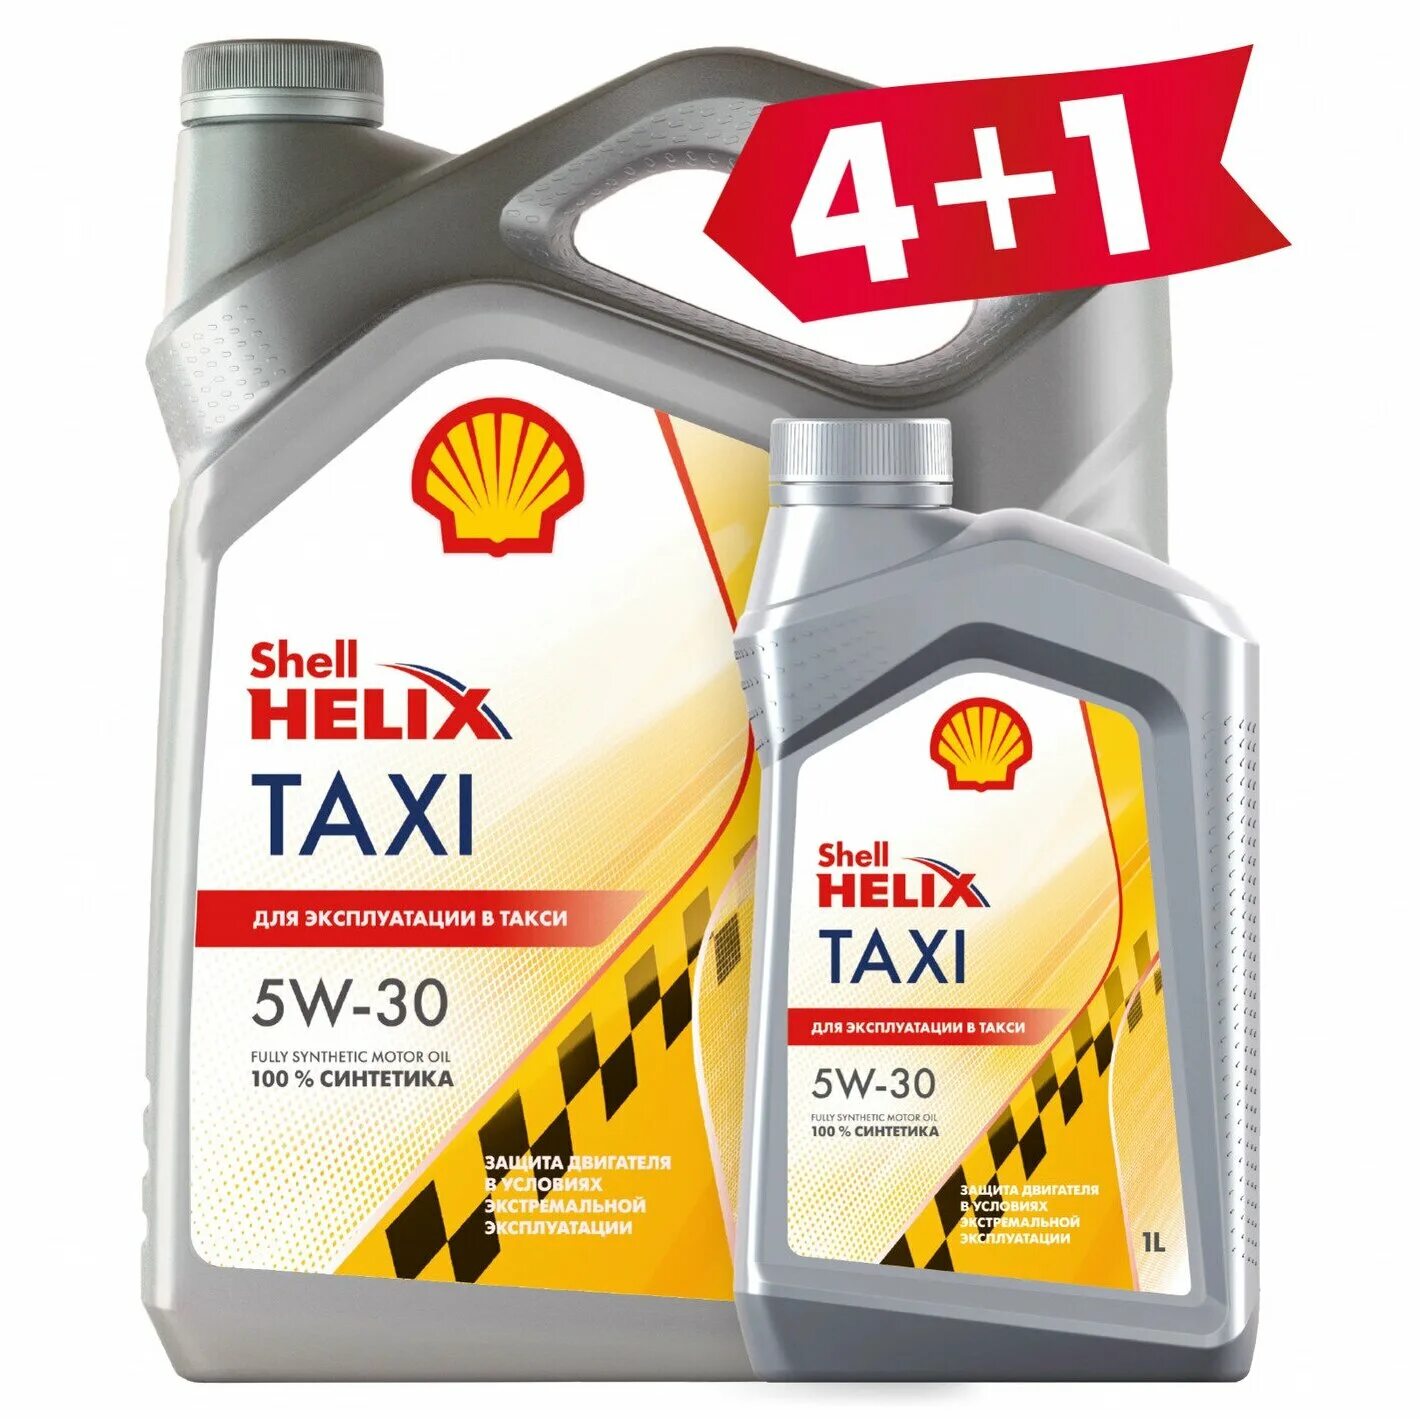 Моторное масло шелл отзывы. Shell Helix Taxi 5w-40 1л. Масло Шелл такси 5w30. Масло Шелл такси 5w40. Shell Taxi 5w-30.